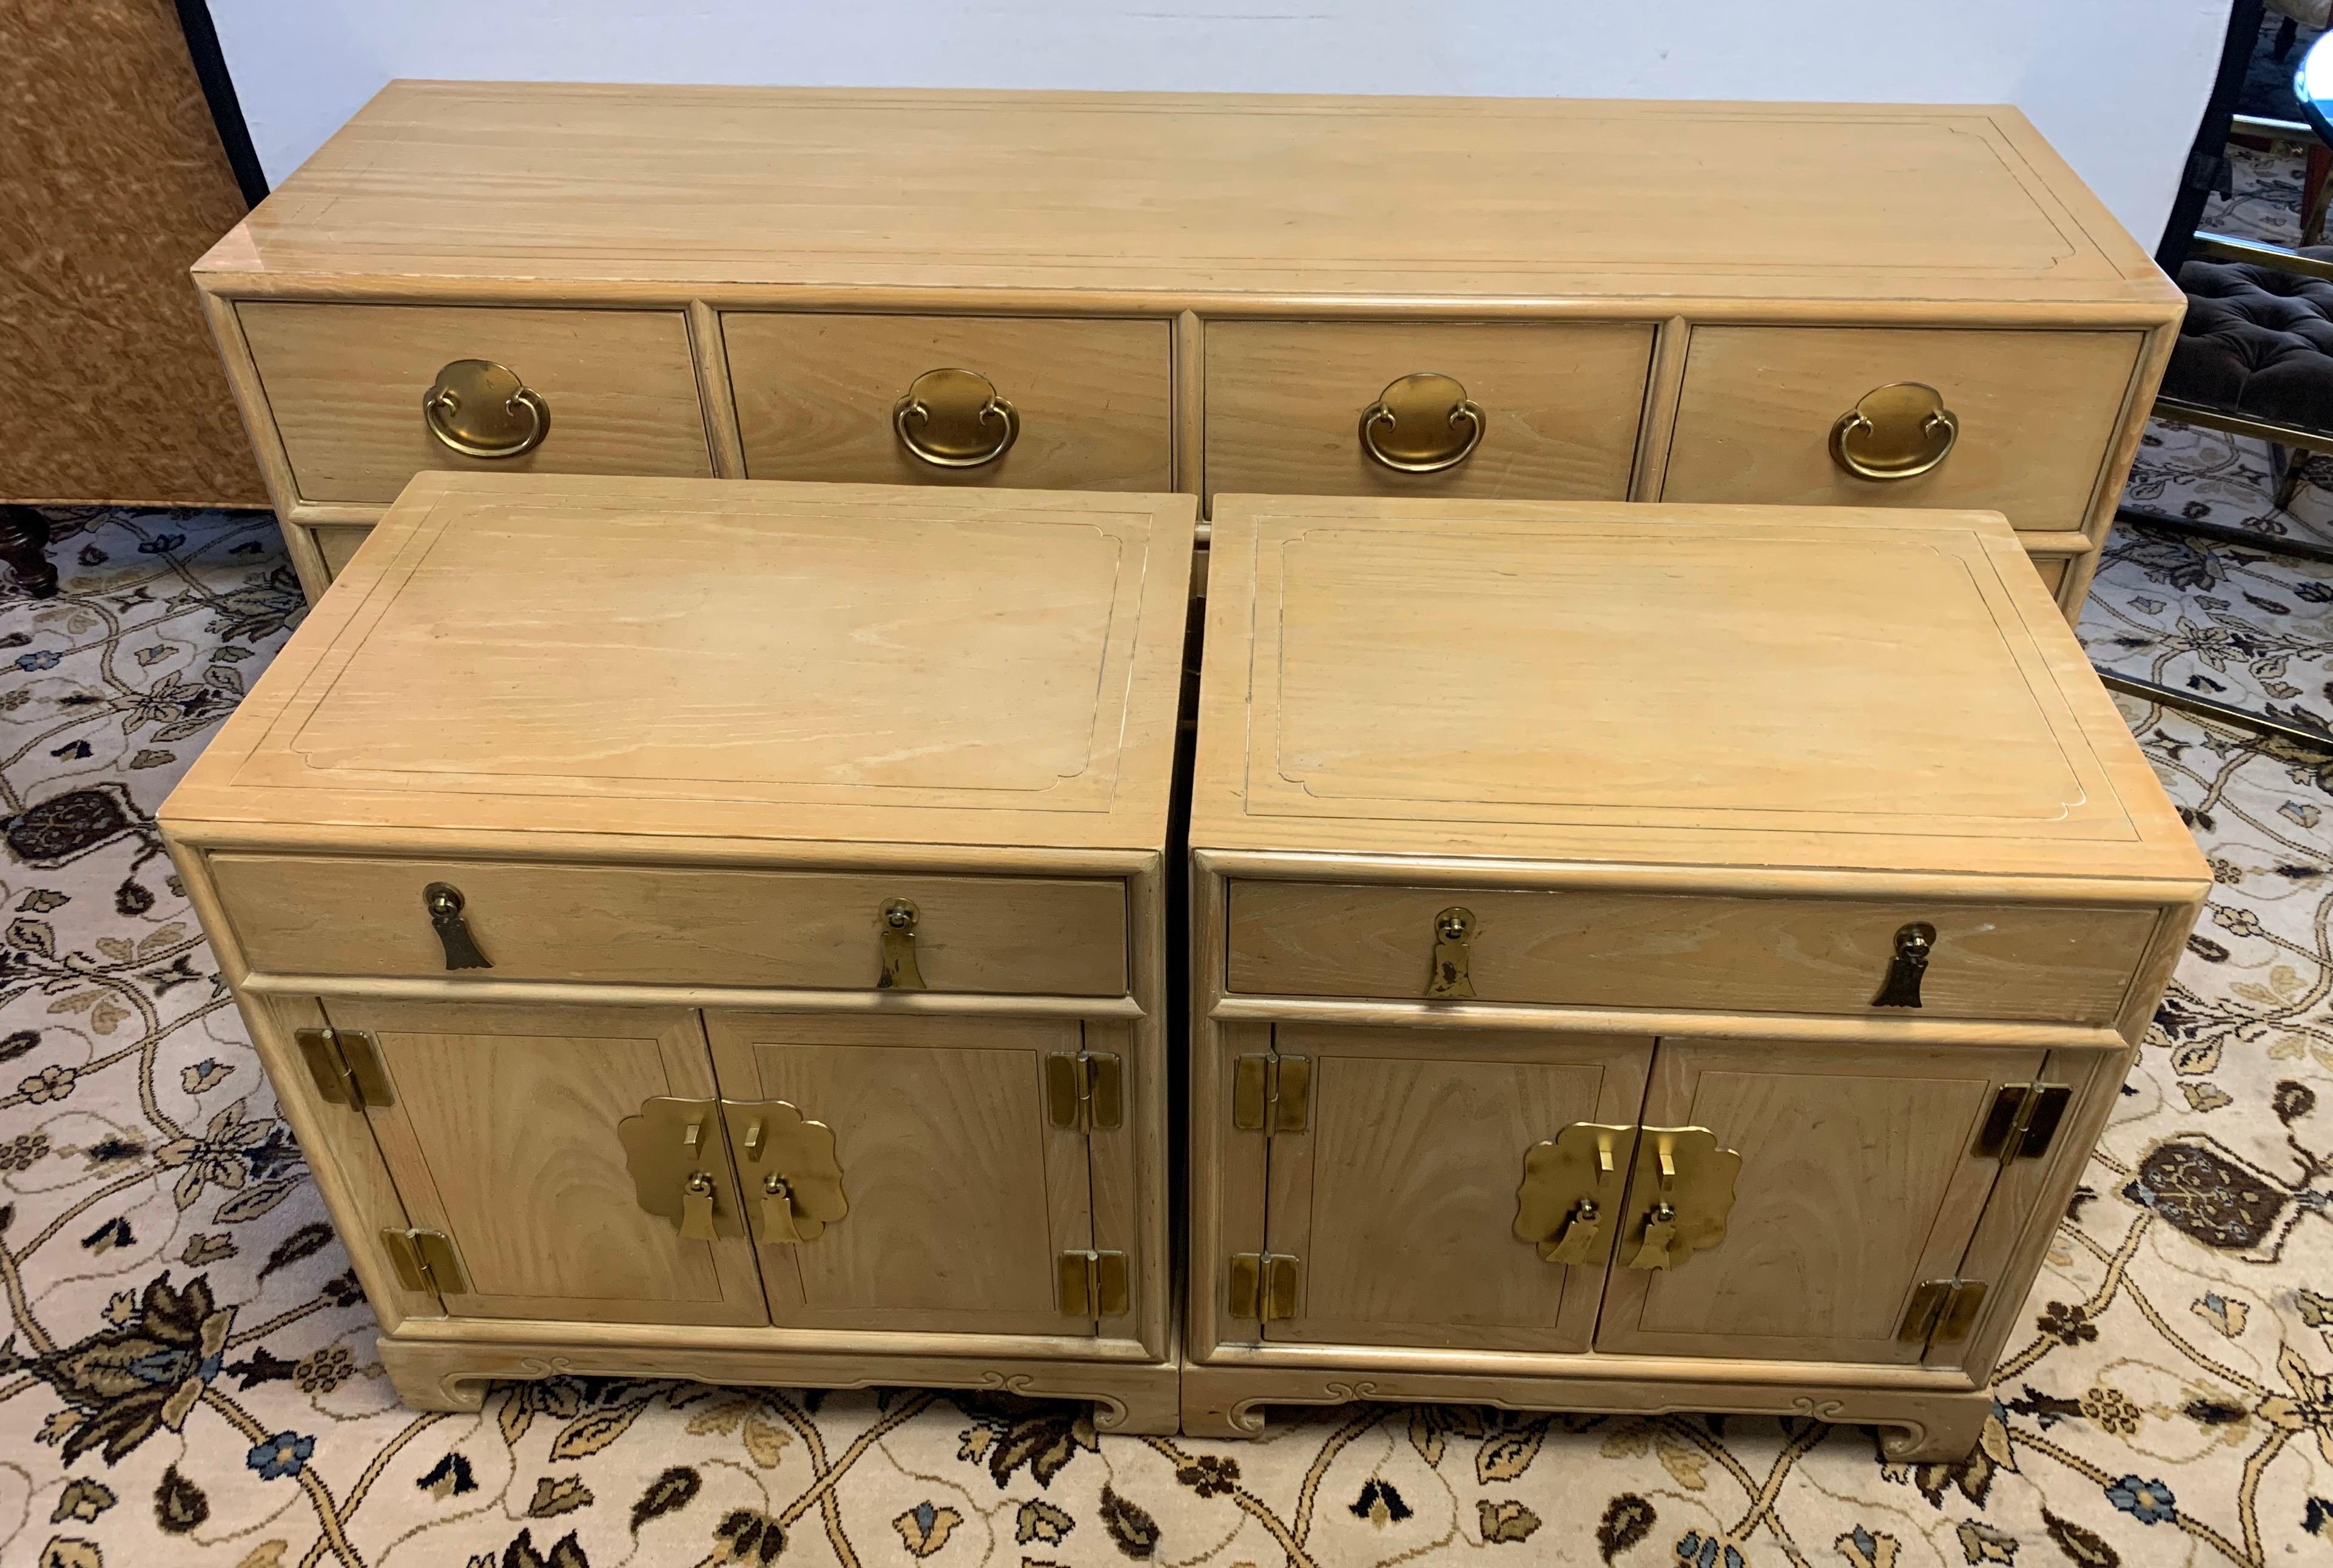 A gorgeous three piece matching set with a chest of drawers and two matching nightstands by Ray Sabota for Century Furniture Company, circa 1970s. Brass hardware and lovely motifs accent the pieces. Excellent vintage condition. Retains the maker